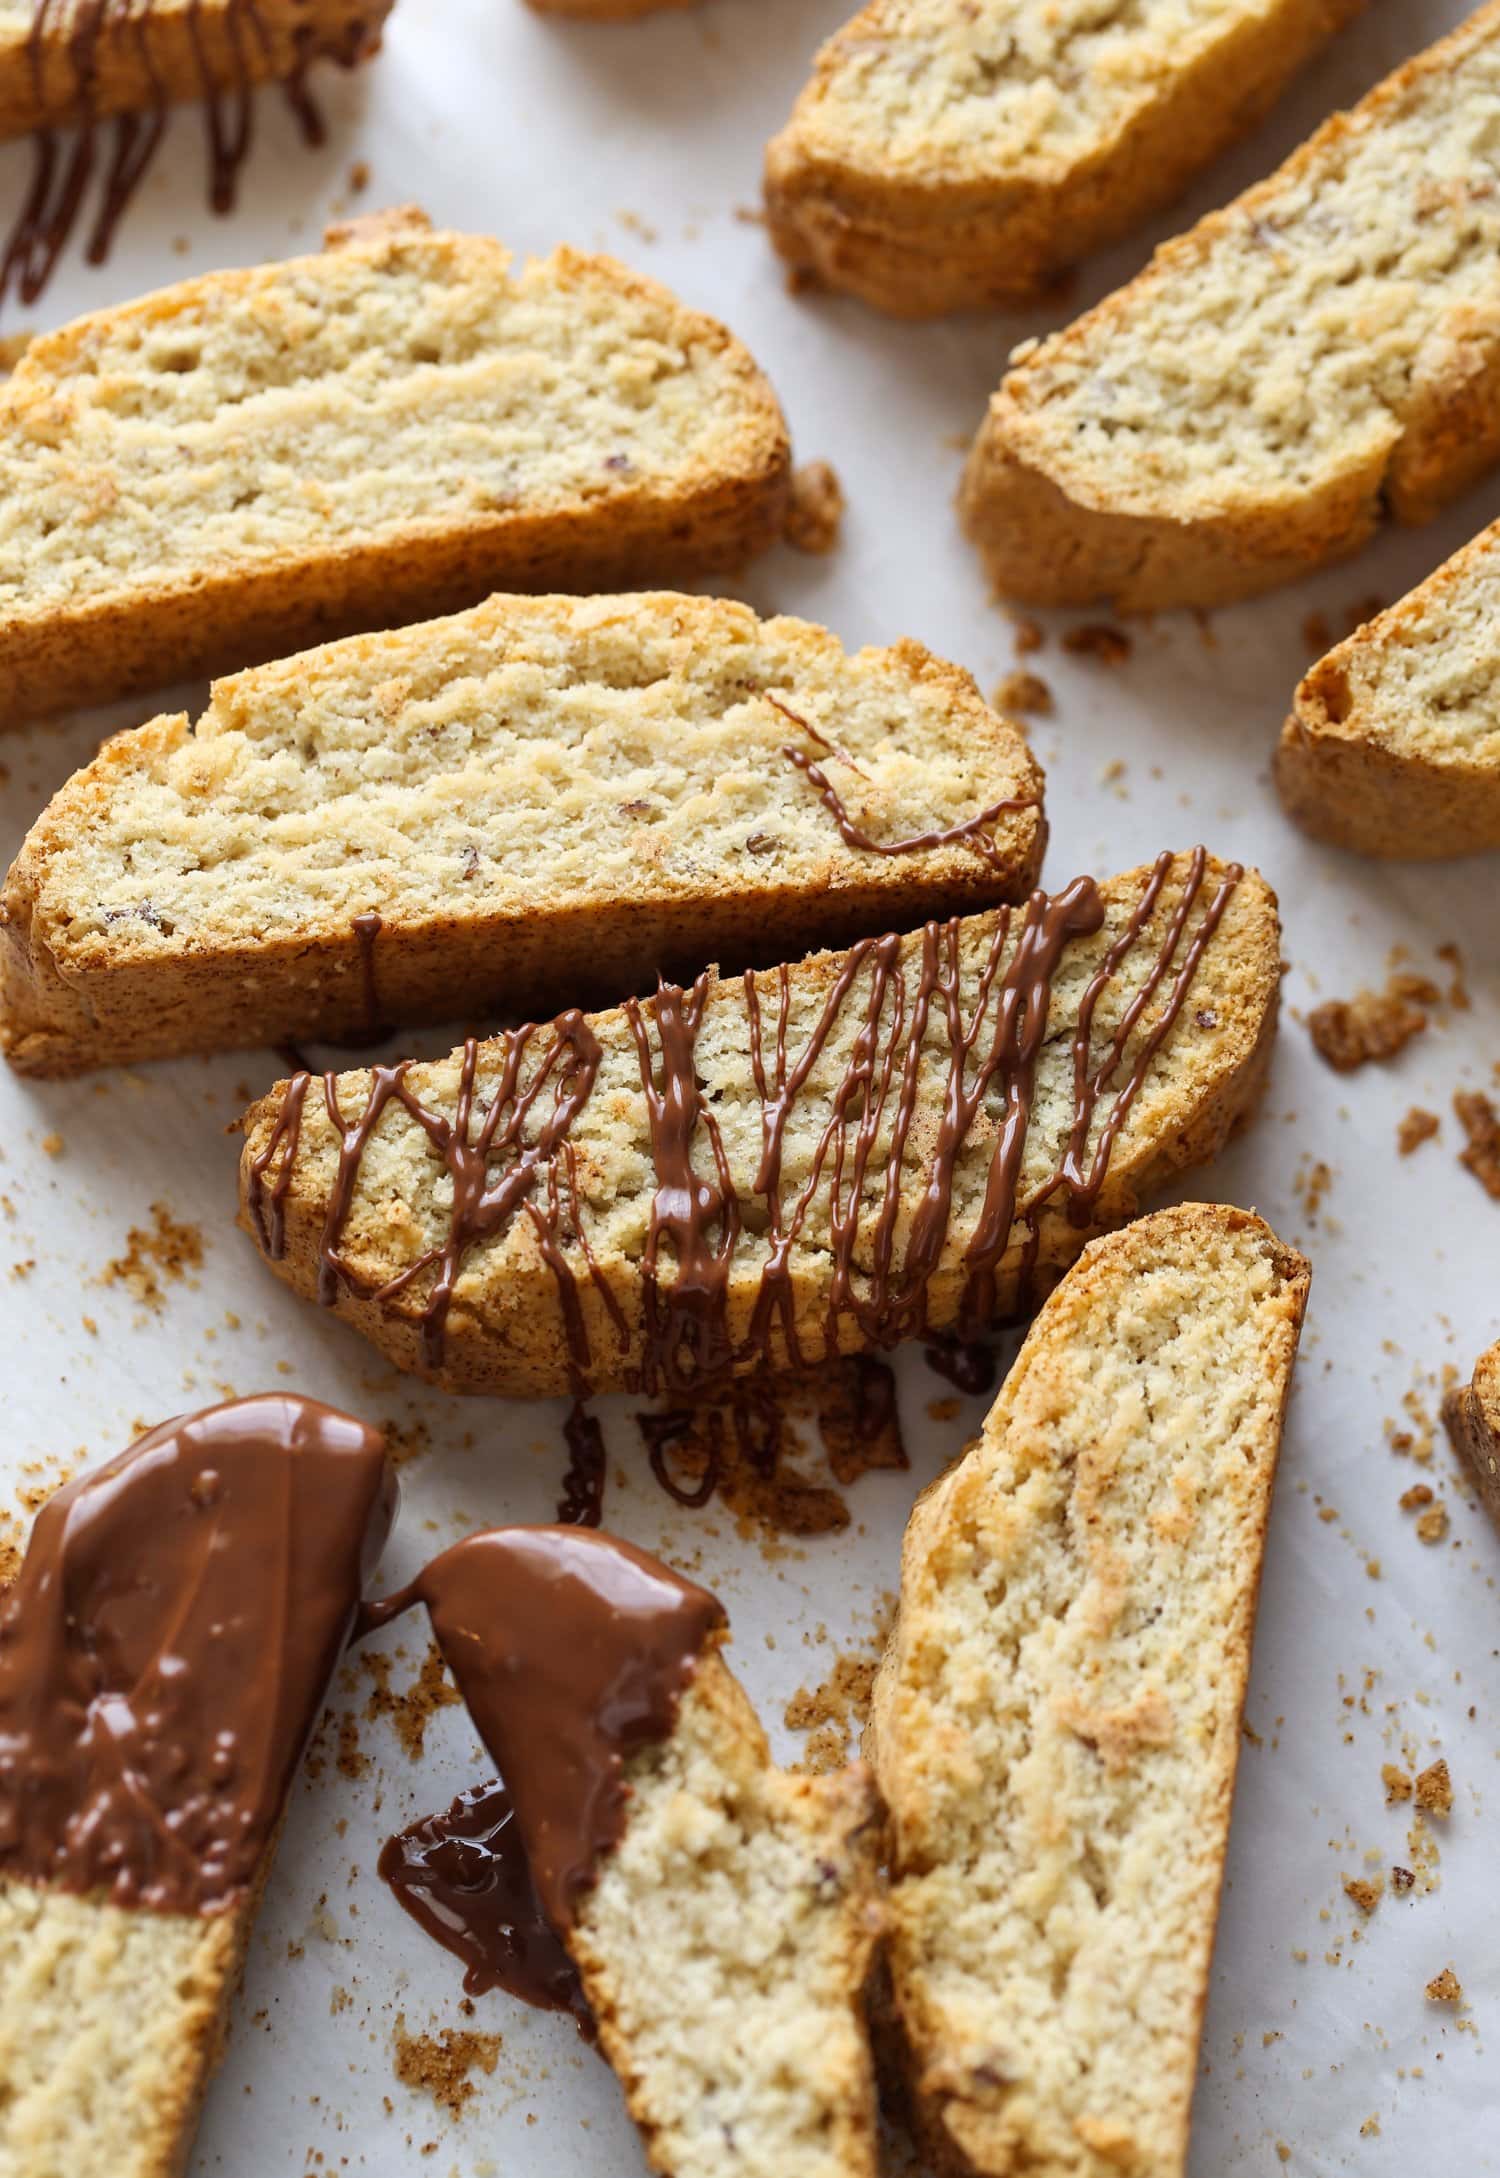 Biscotti covered in chocolate.